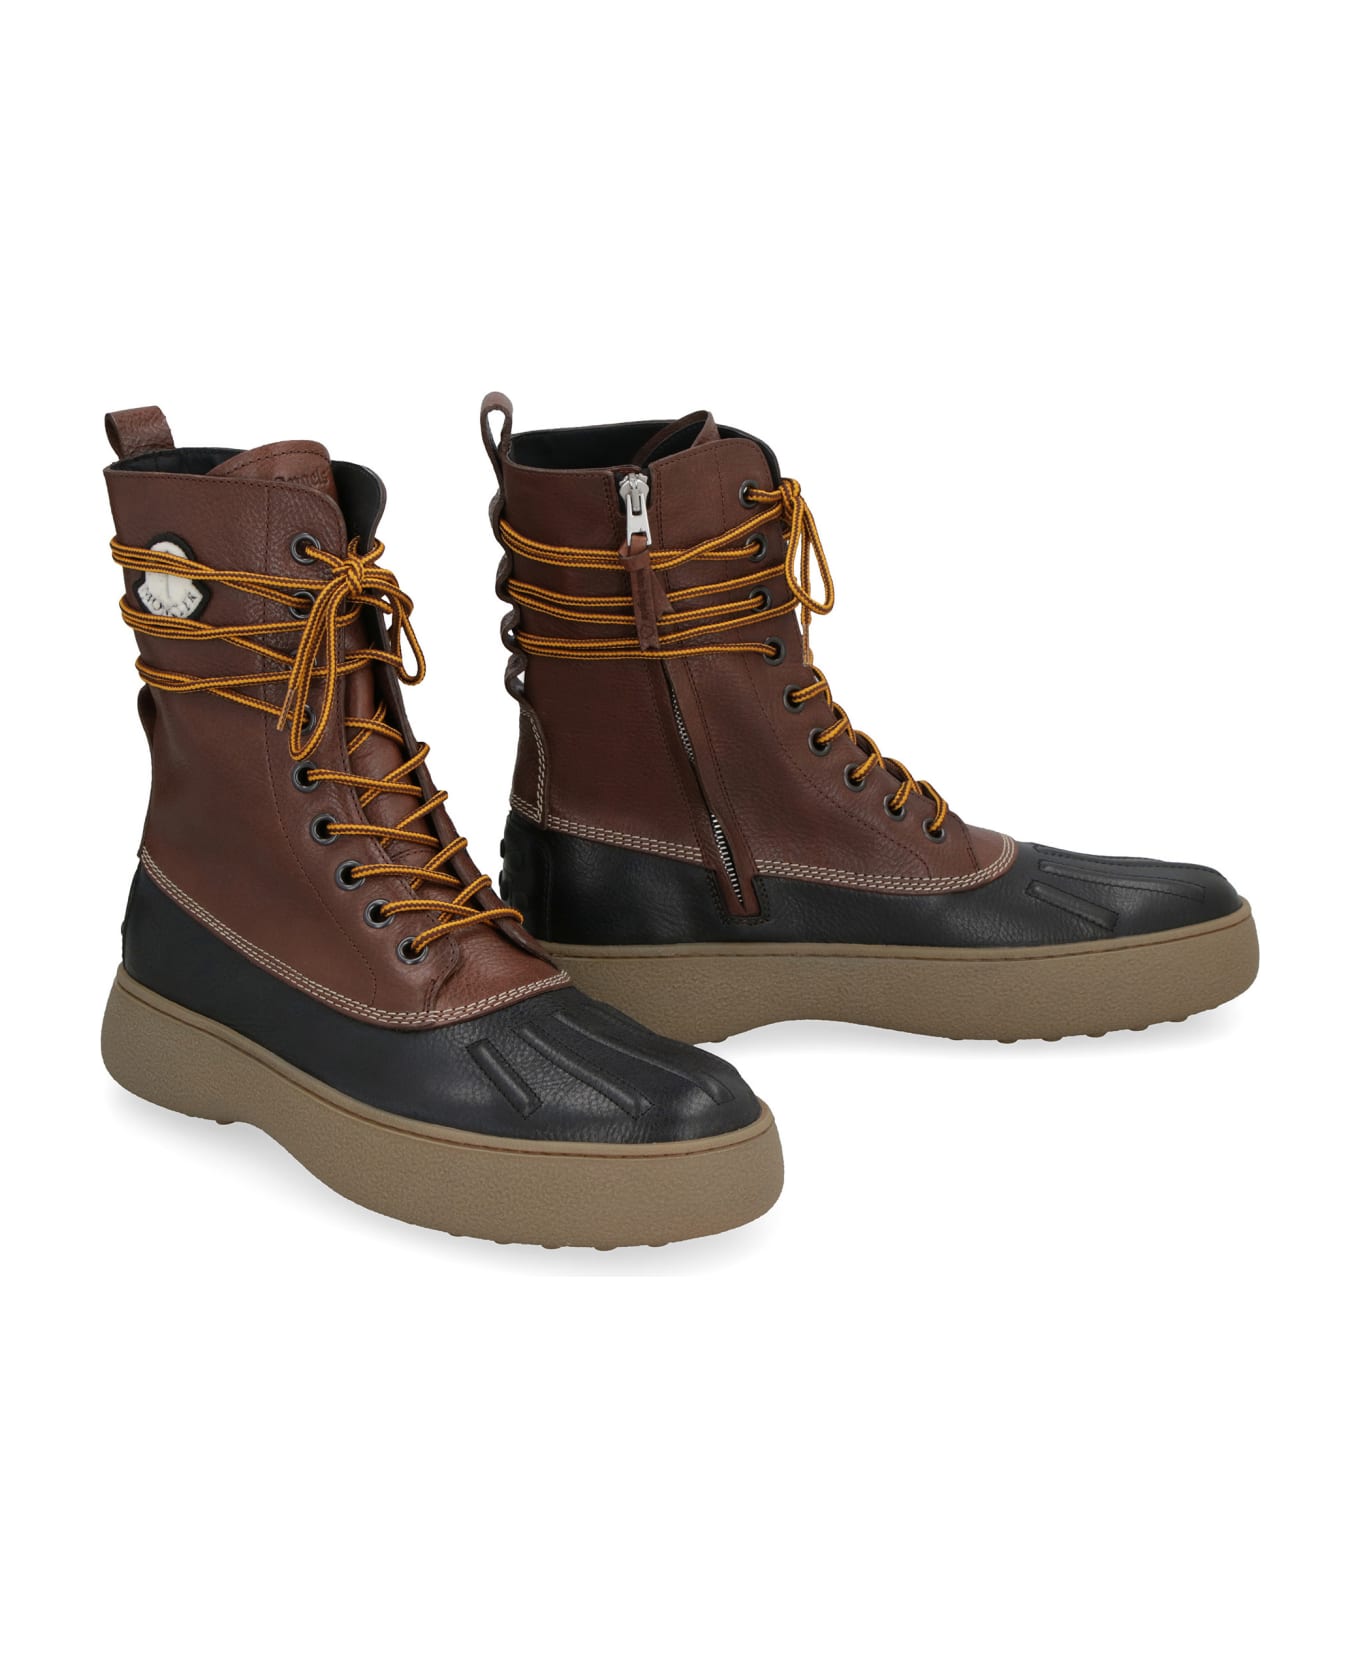 Moncler Genius the best cycling shoes - Winter Gommino Leather Boots - brown